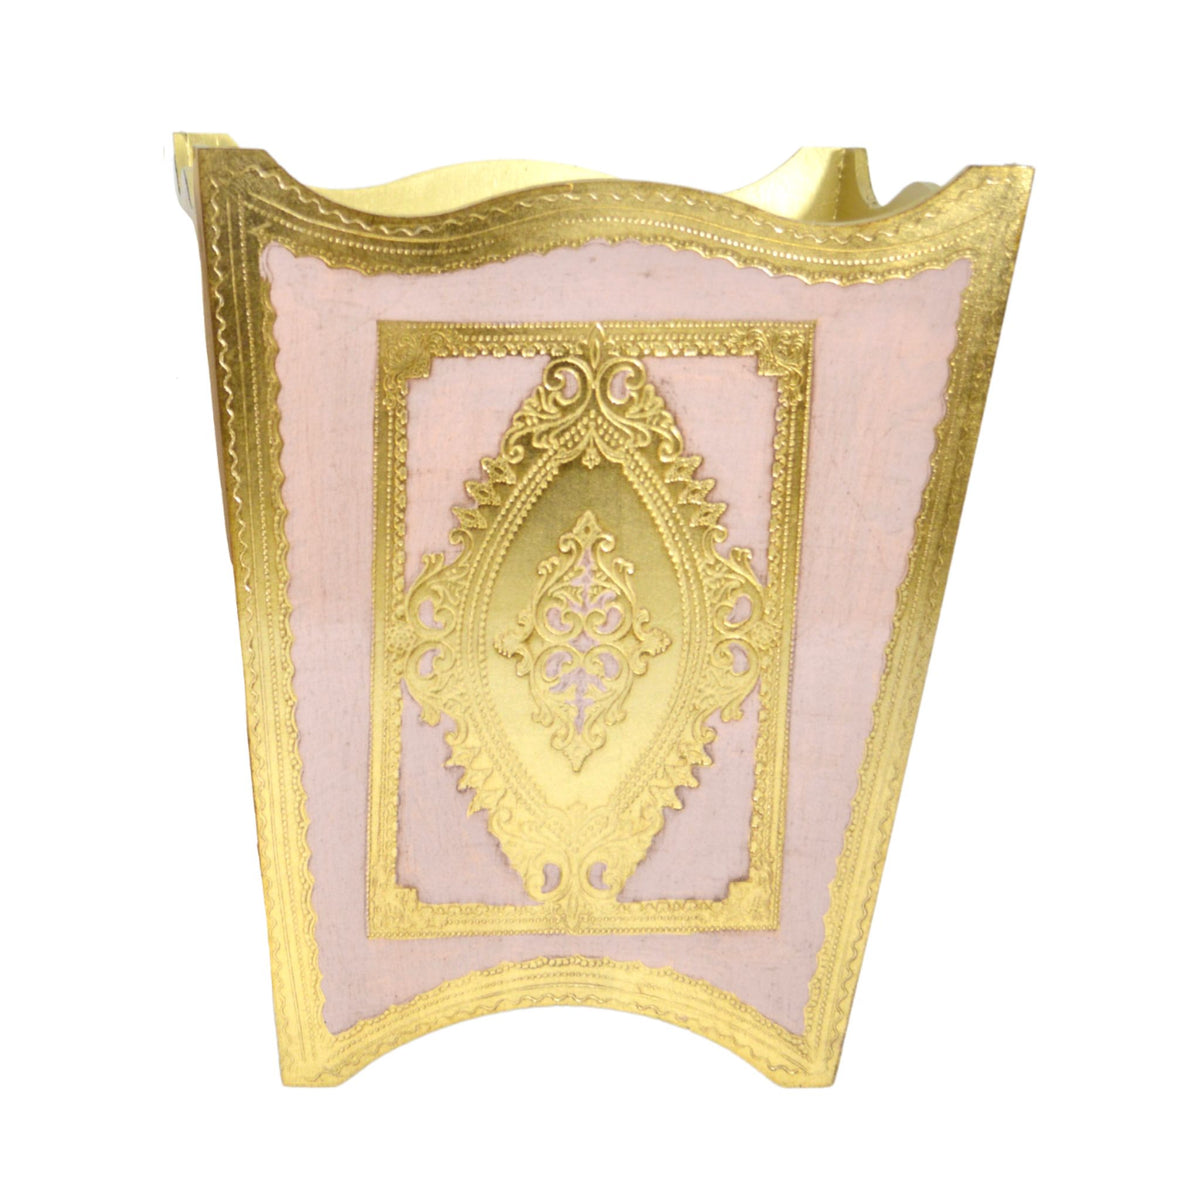 Florentine Carved Wood Waste Bin, Pink and Gold, Made in Italy - My Italian Decor